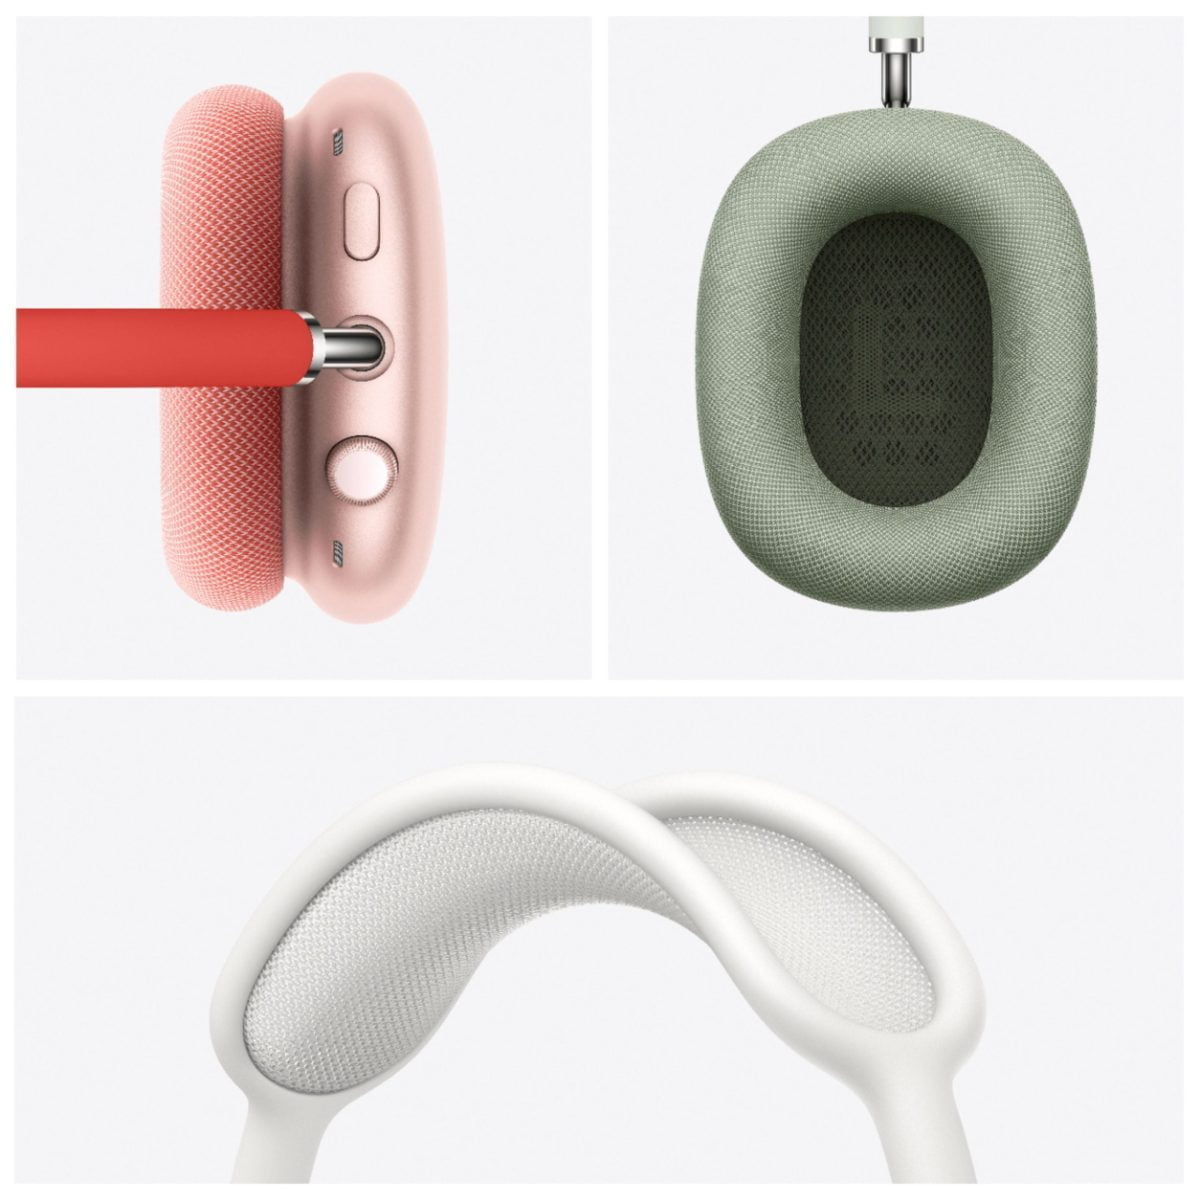 6373460Cv15D Scaled Apple &Lt;H1&Gt;Apple Airpods Max - Space Gray&Lt;/H1&Gt; &Lt;Div Class=&Quot;Long-Description-Container Body-Copy &Quot;&Gt; &Lt;Div Class=&Quot;Product-Description&Quot;&Gt;Airpods Max Reimagine Over-Ear Headphones. An Apple-Designed Dynamic Driver Provides Immersive High-Fidelity Audio. Every Detail, From Canopy To Cushions, Has Been Designed For An Exceptional Fit. Active Noise Cancellation Blocks Outside Noise, While Transparency Mode Lets It In. And Spatial Audio With Dynamic Head Tracking Provides Theater-Like Sound That Surrounds You.&Lt;/Div&Gt; &Lt;/Div&Gt; Airpods Max Apple Airpods Max - Space Gray